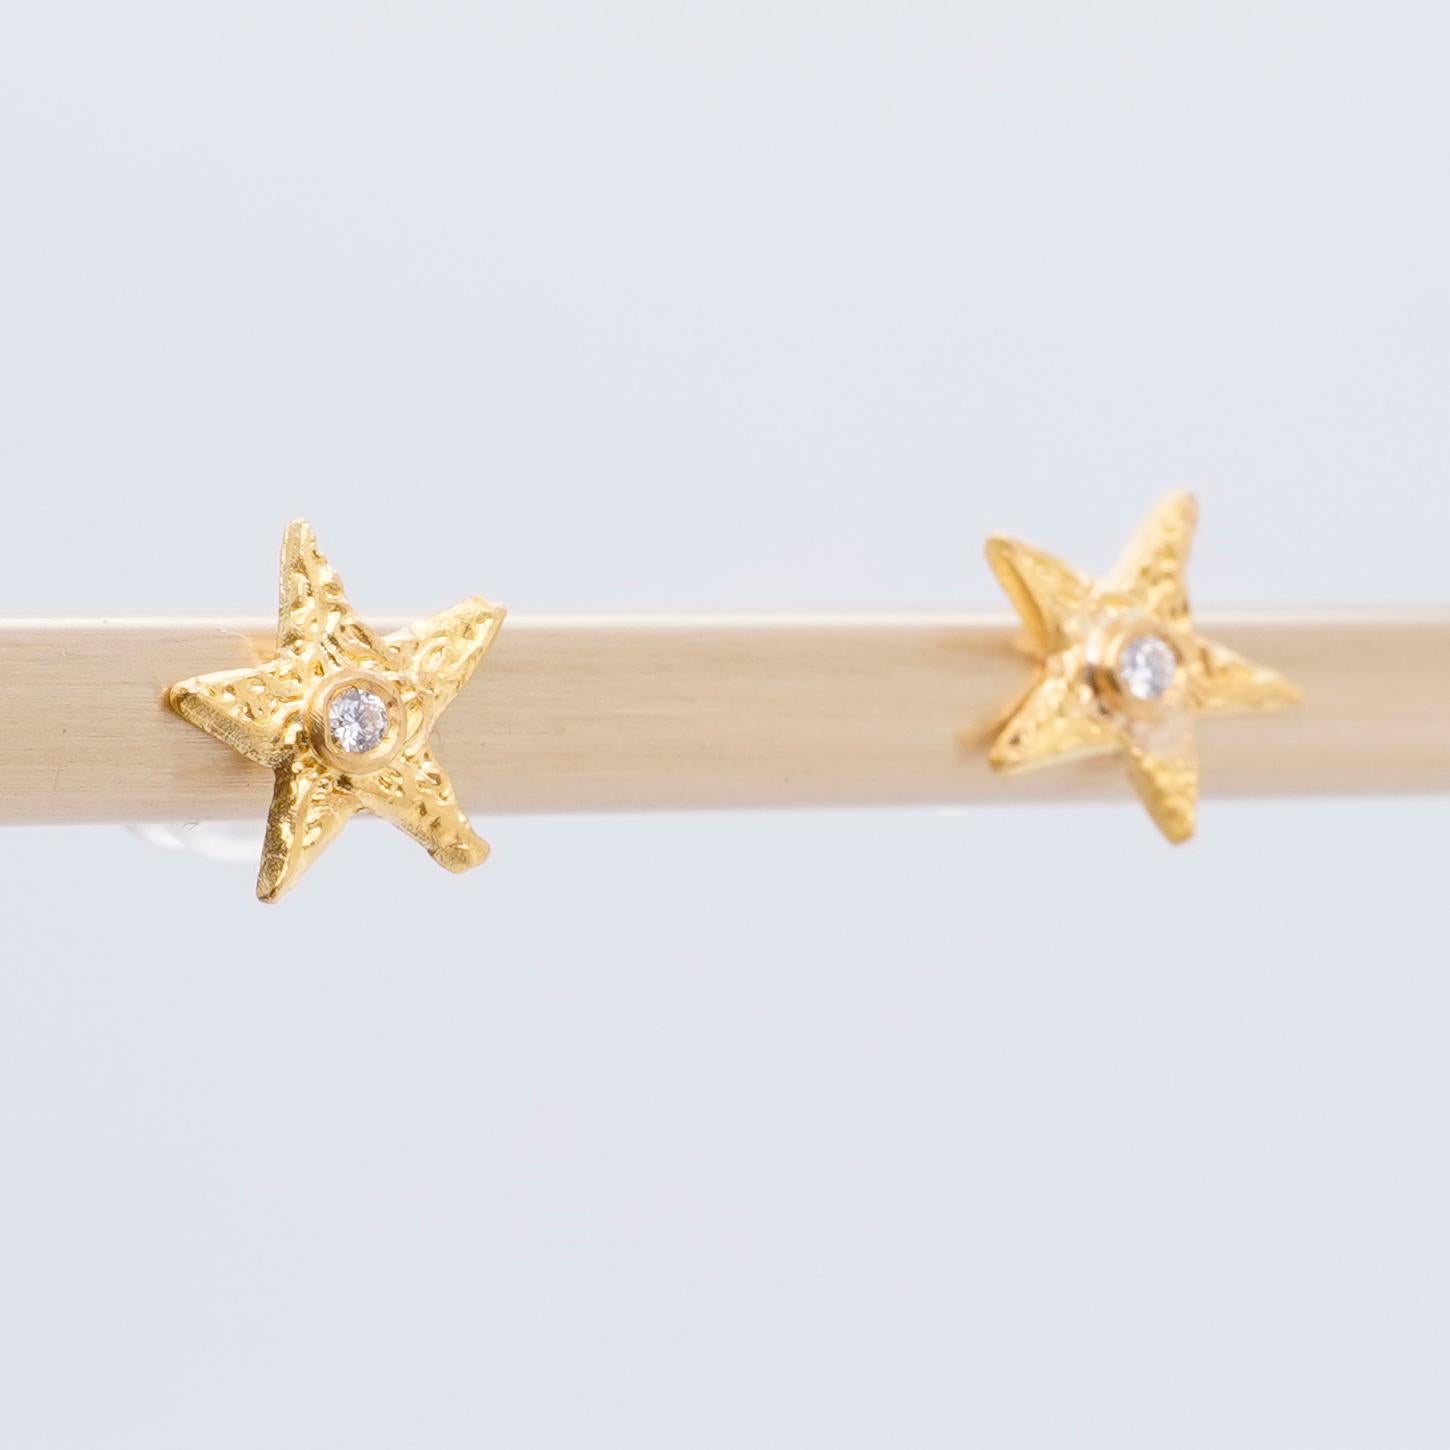 Textured, Star Stud Earrings with Diamonds, in 24kt Gold For Sale 2